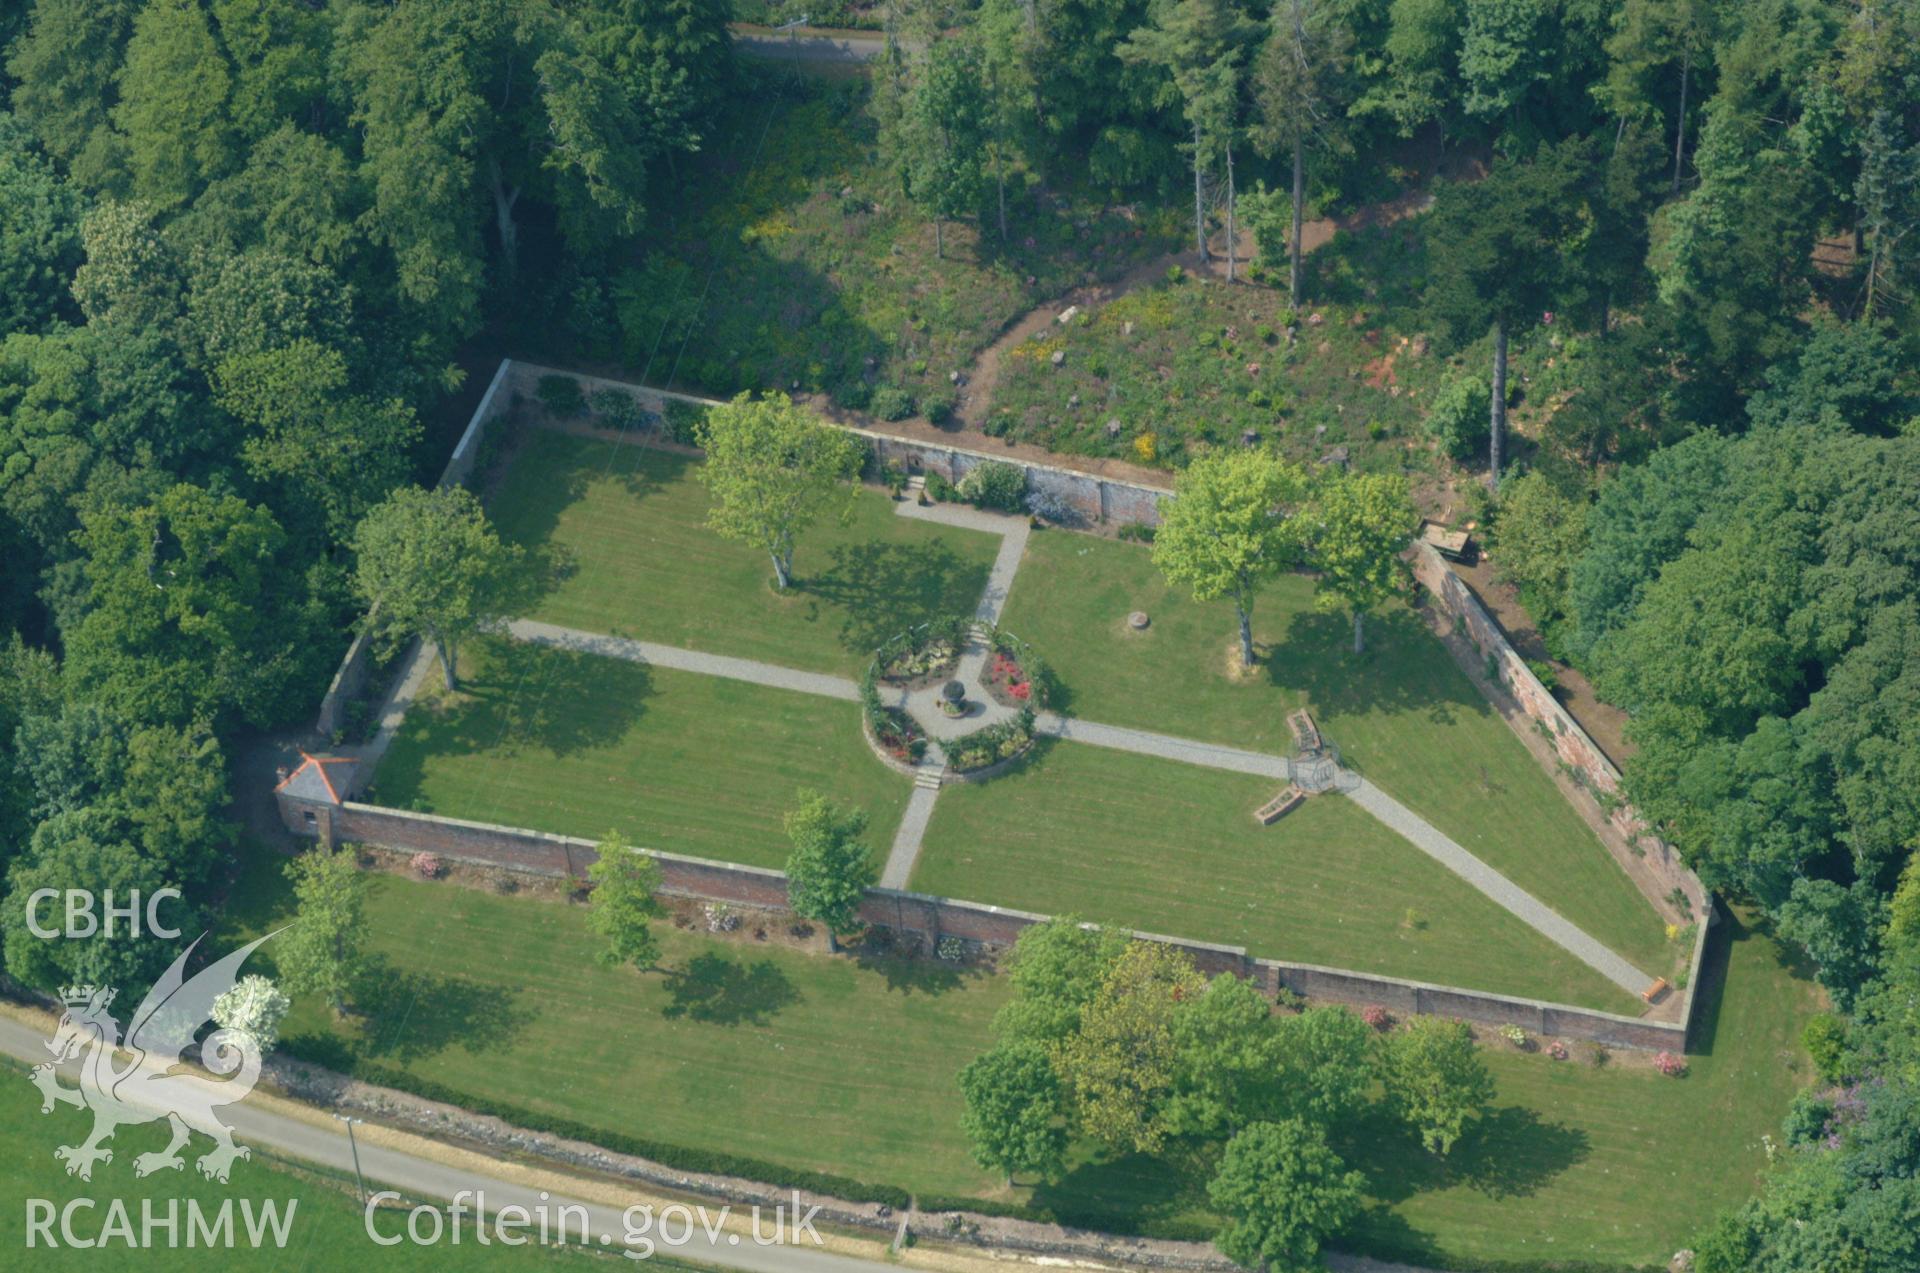 RCAHMW colour oblique aerial photograph of gardens at Llys-Dulas. Taken on 26 May 2004 by Toby Driver